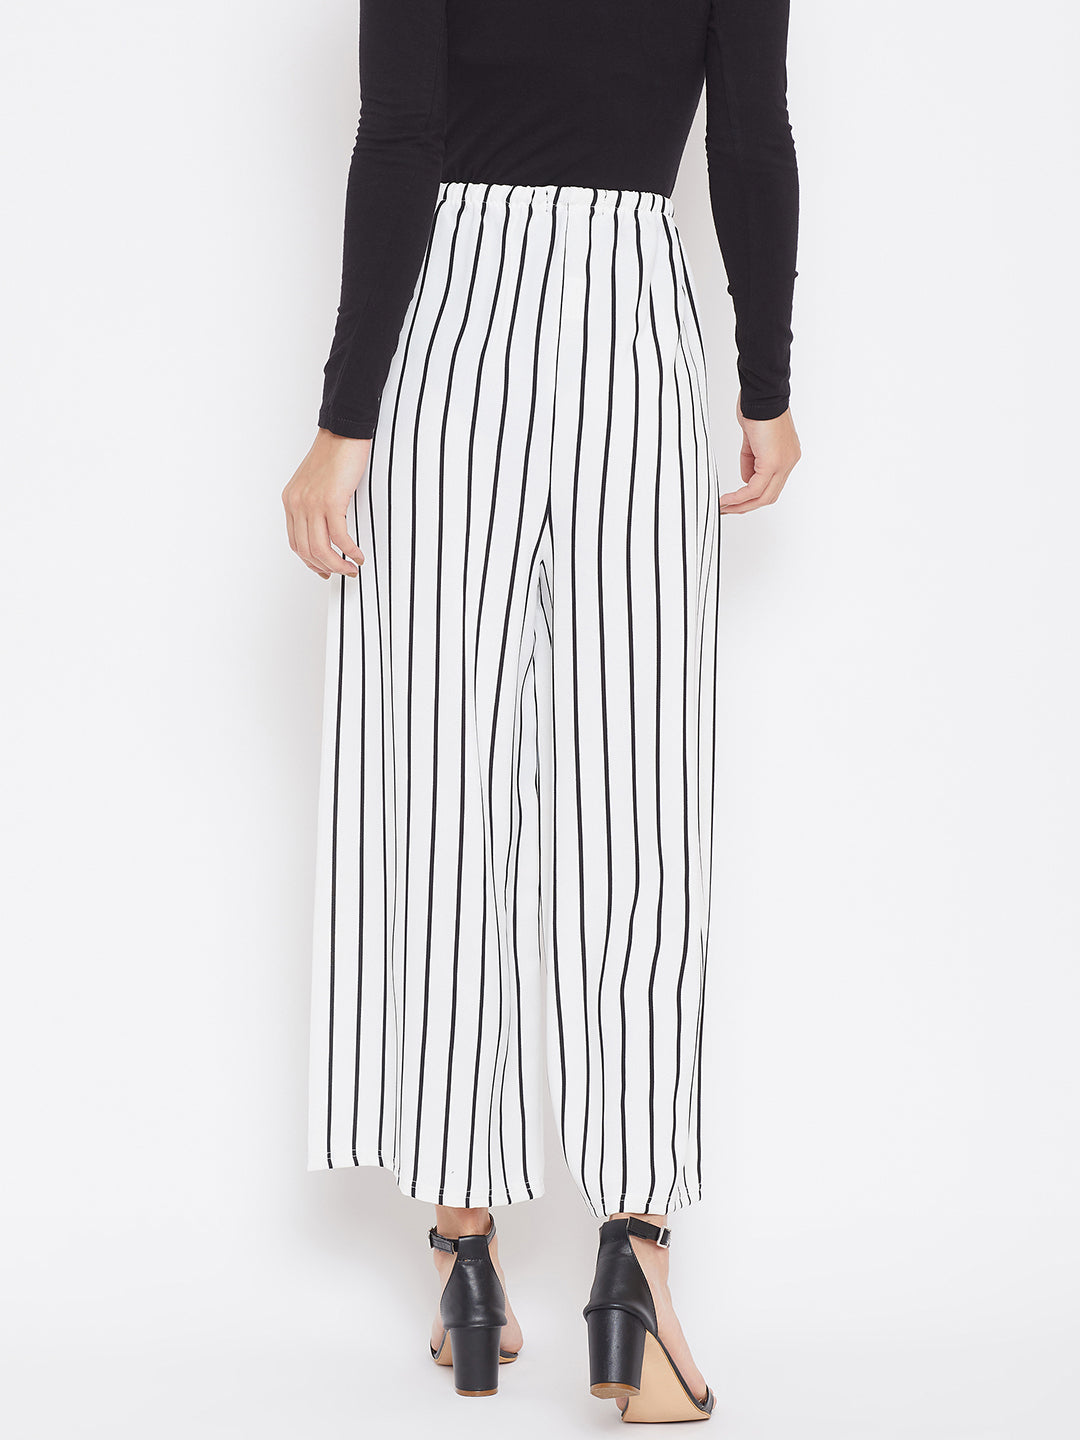 White Striped Trousers - Women Trousers